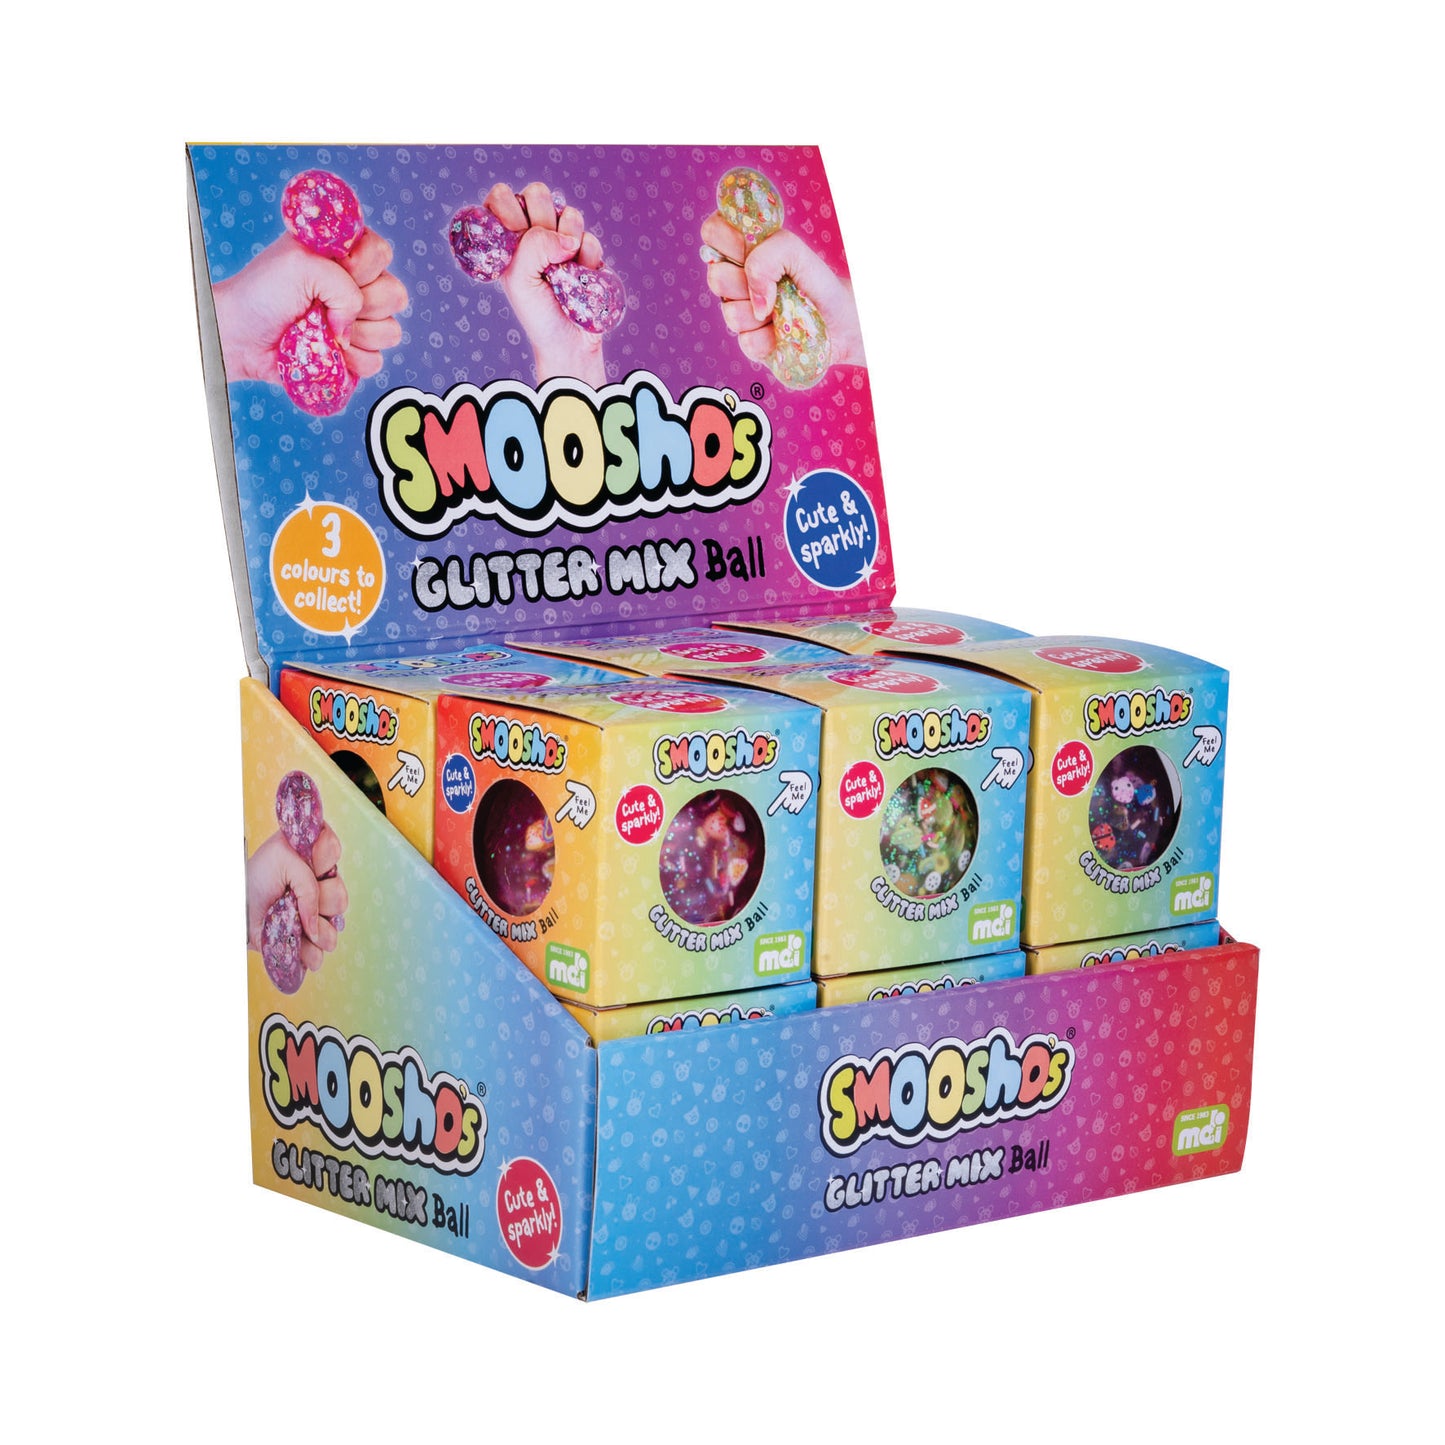 Smooshos Glitter Mix Ball - Sparkling Sensory Toy for Relaxation and Exploration